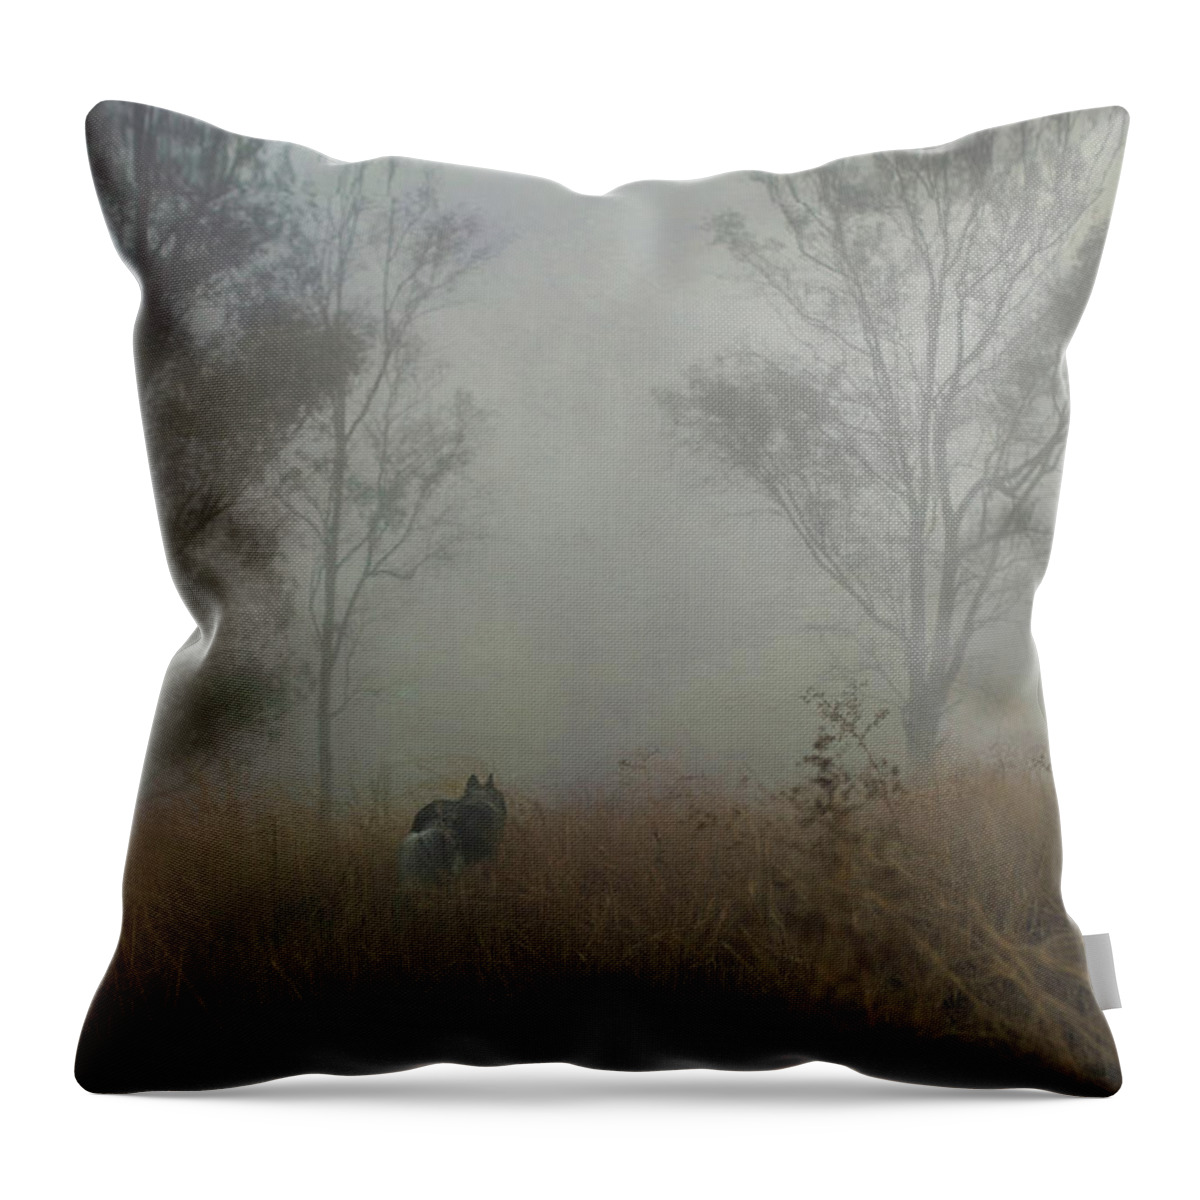 Fog Throw Pillow featuring the digital art Into the Mist by Nicole Wilde